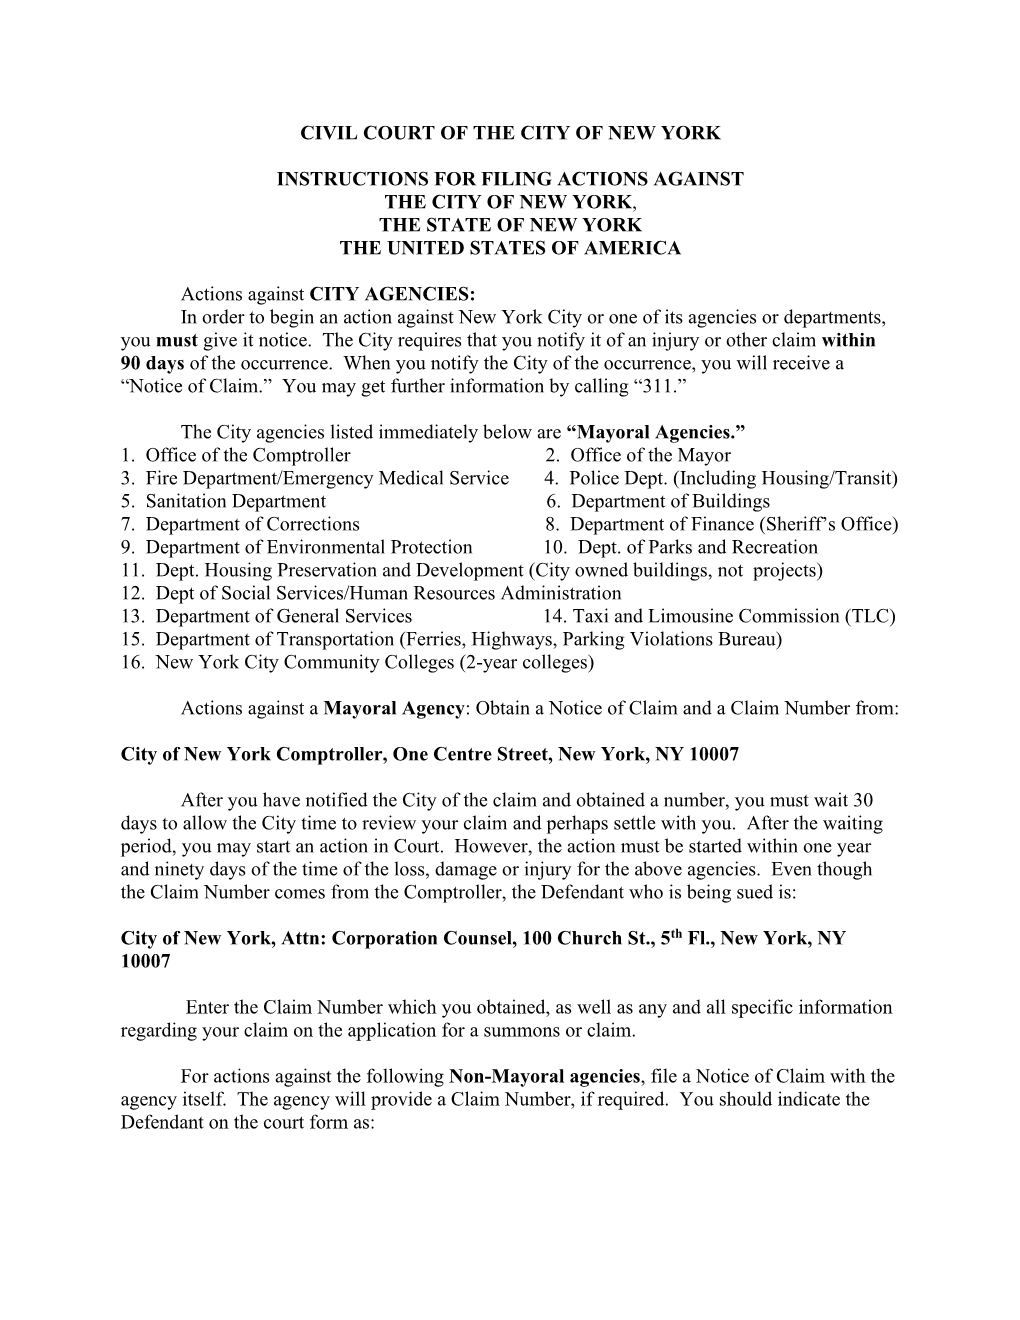 Instructions for Filing Actions Against the City of New York, the State of New York the United States of America